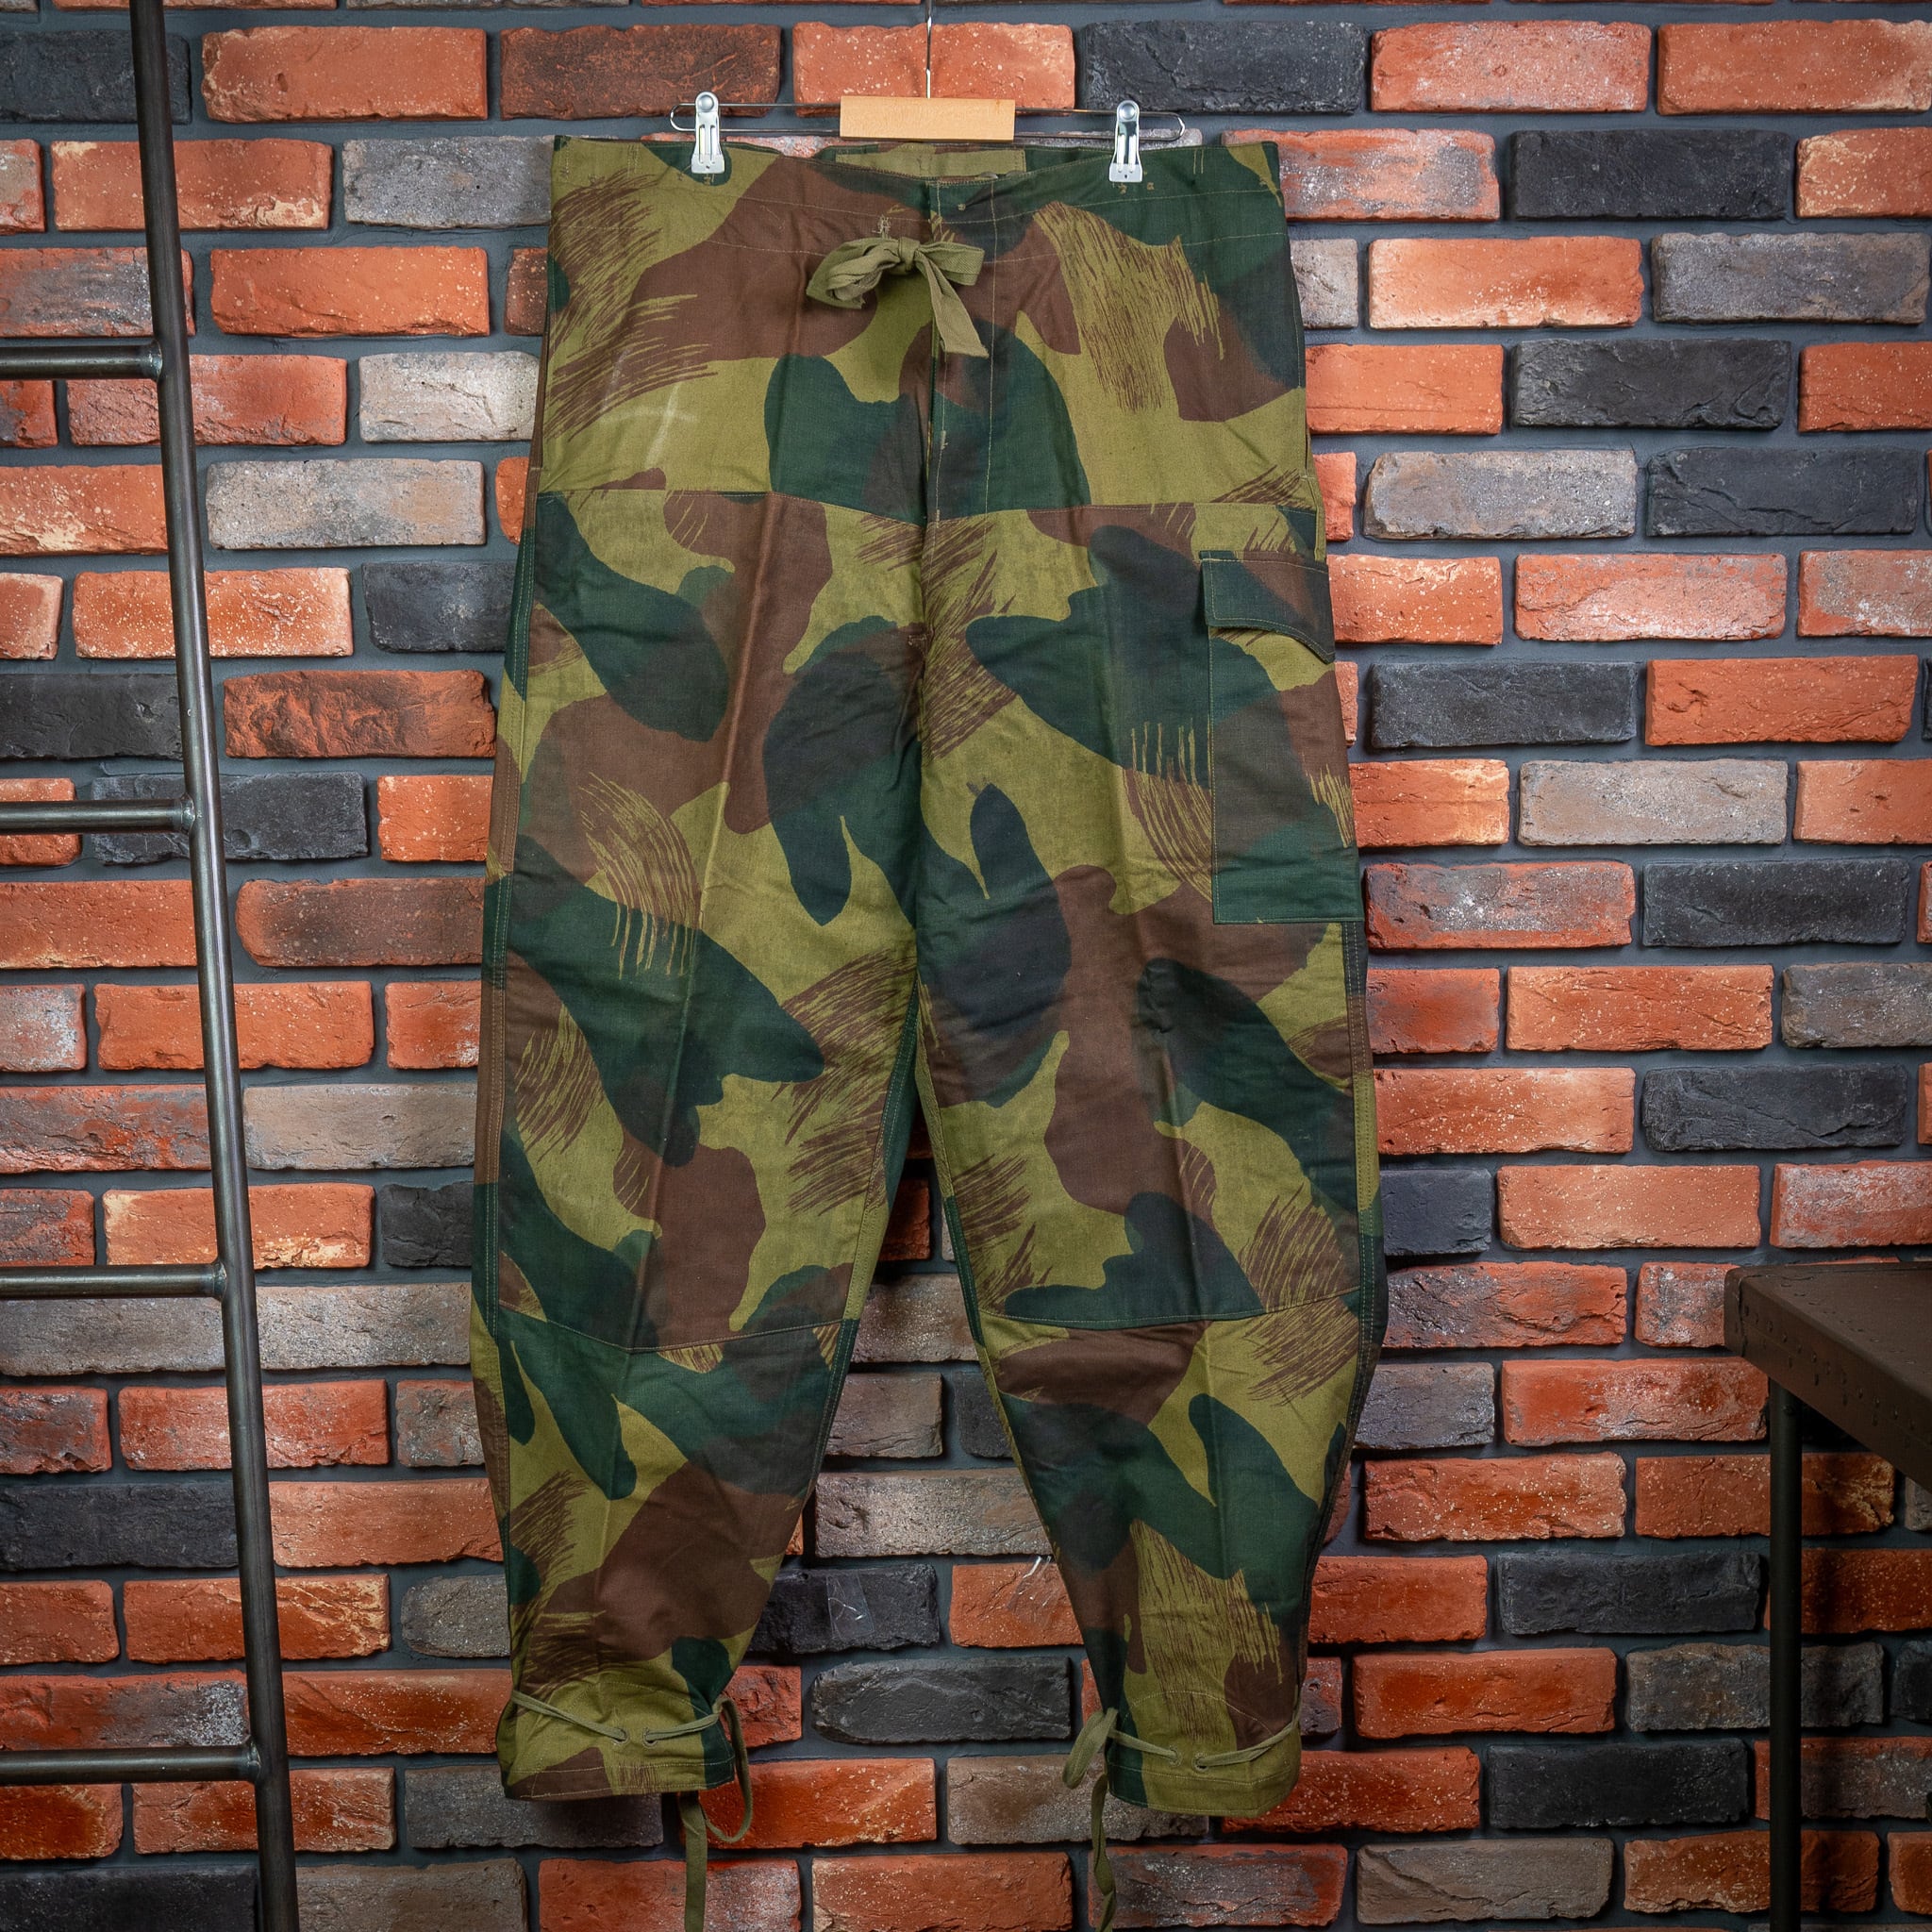 【DEADSTOCK】50's Belgian Army Brushstroke Camouflage Trousers 実物 ベルギー軍 50年代  ブラッシュストロークカモ オーバーパンツ 希少 レア No.2 | FAR EAST SIGNAL powered by BASE